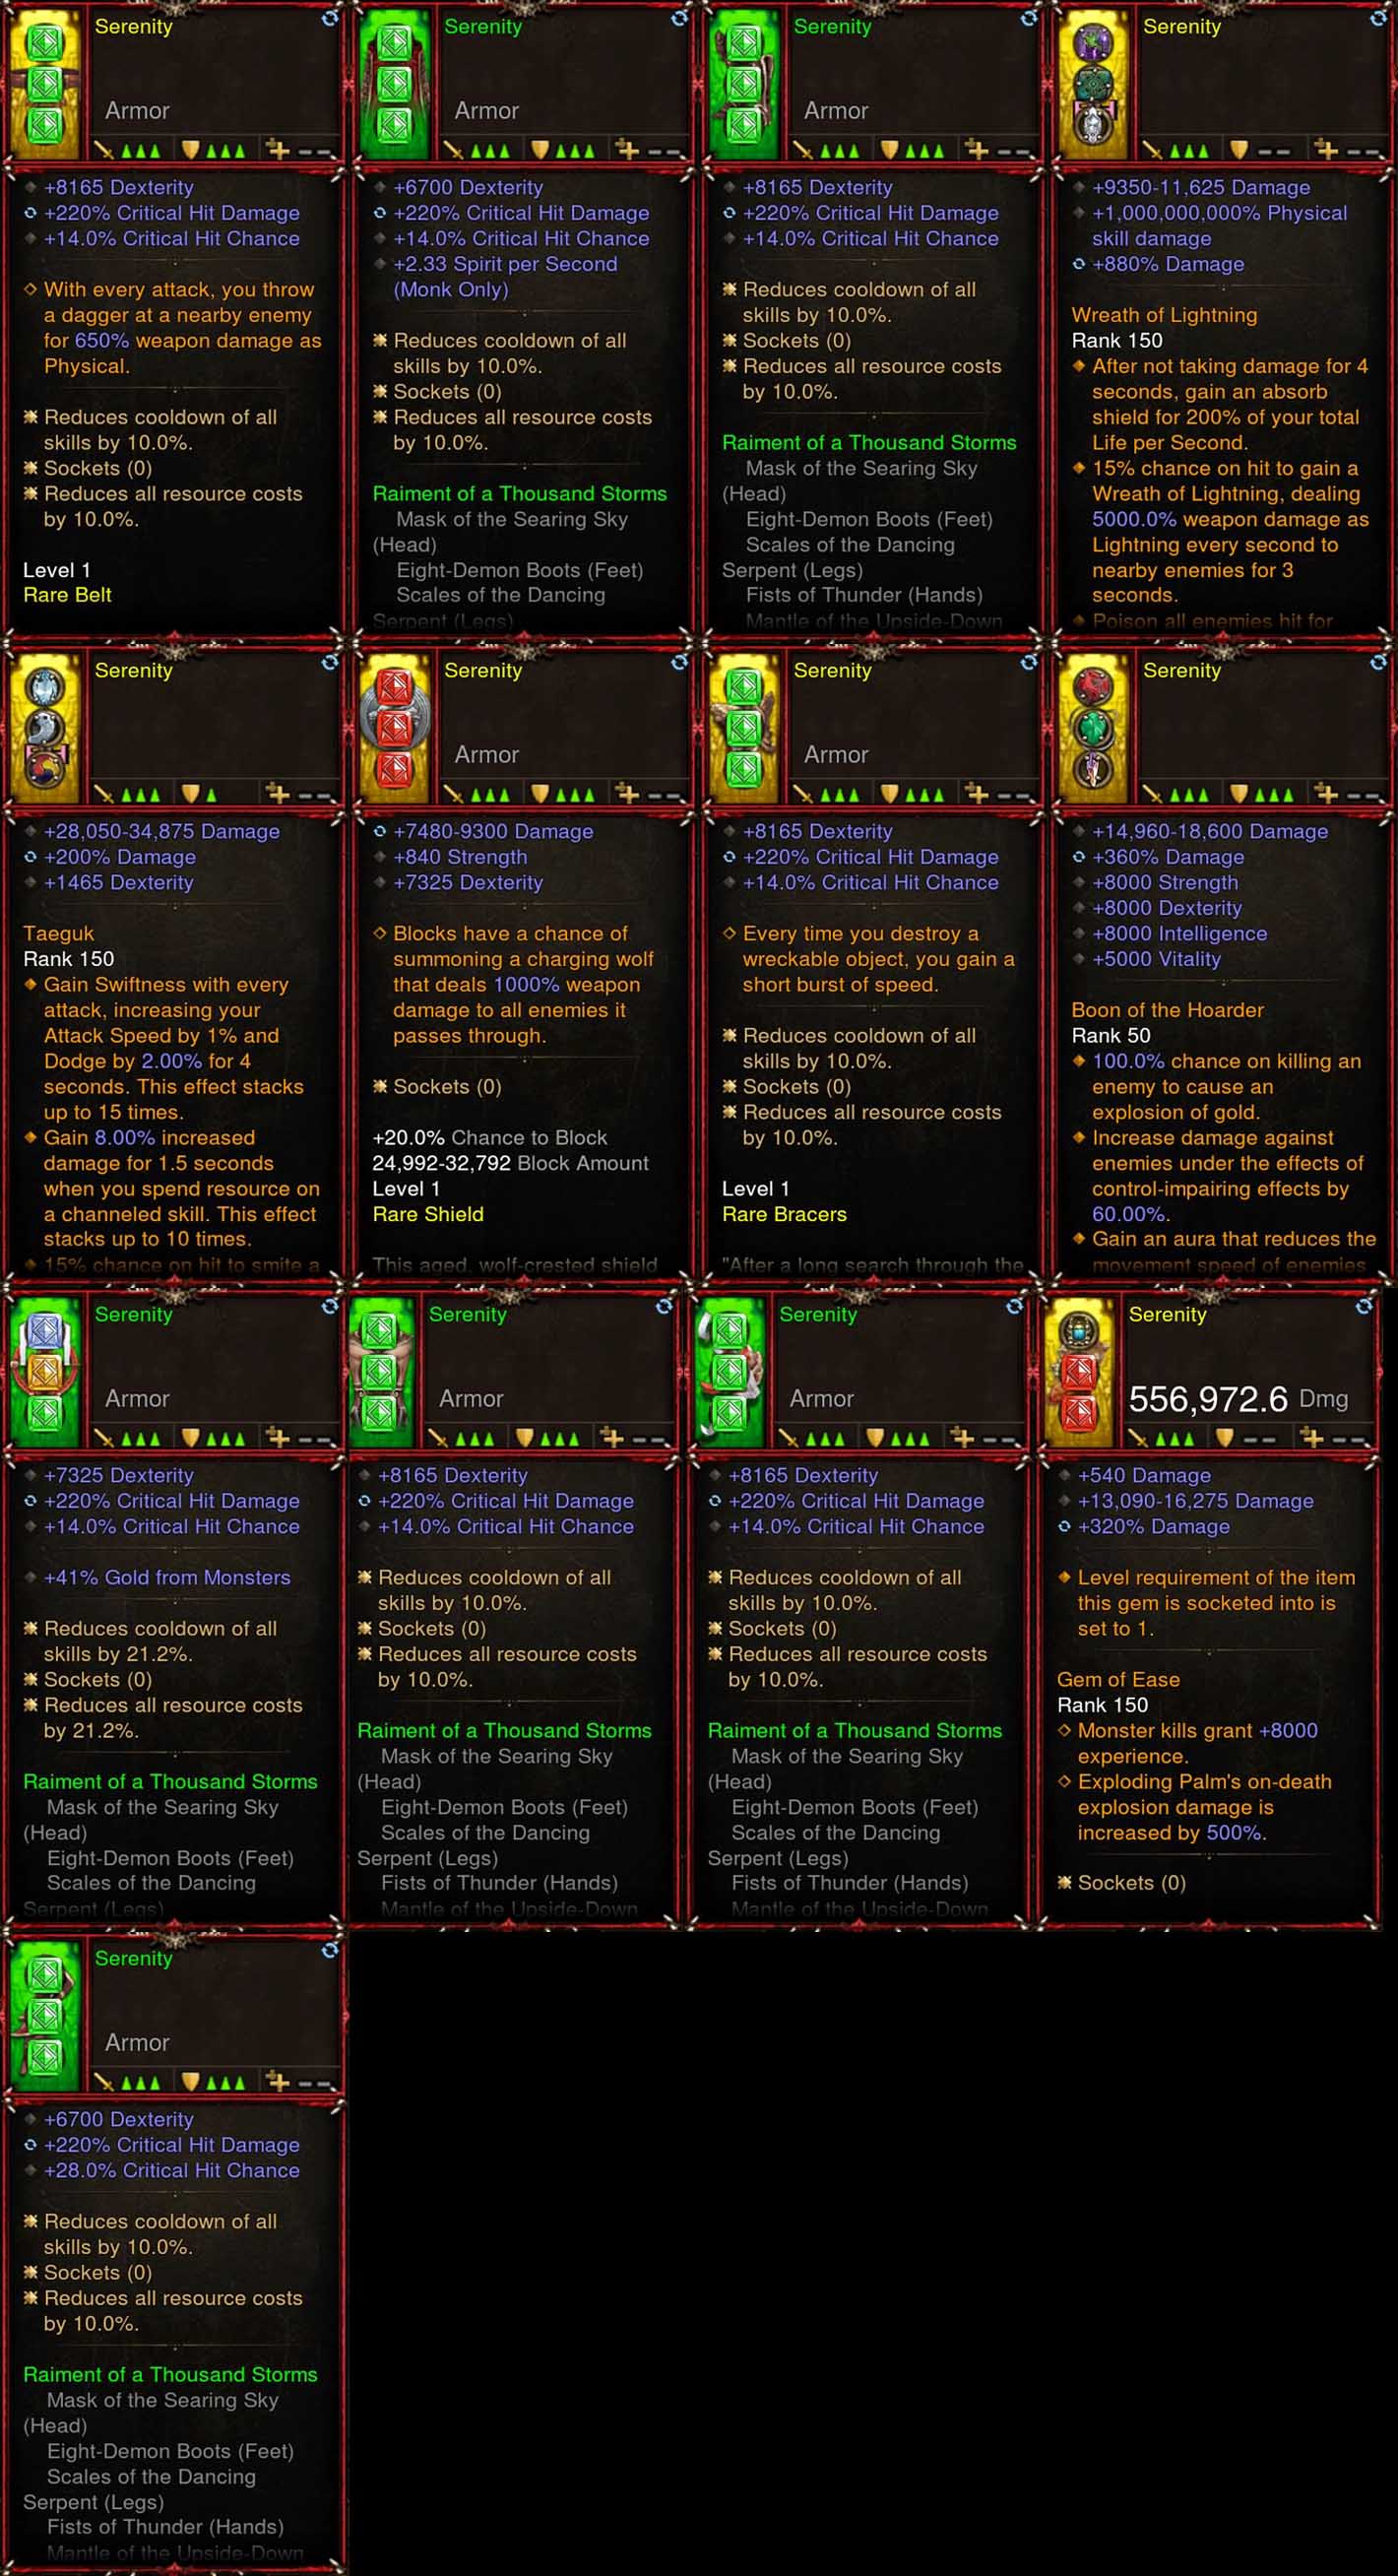 [Primal Ancient] 1-70 Thousand Storms Monk Set Serenity for gRift 150 Diablo 3 Mods ROS Seasonal and Non Seasonal Save Mod - Modded Items and Gear - Hacks - Cheats - Trainers for Playstation 4 - Playstation 5 - Nintendo Switch - Xbox One